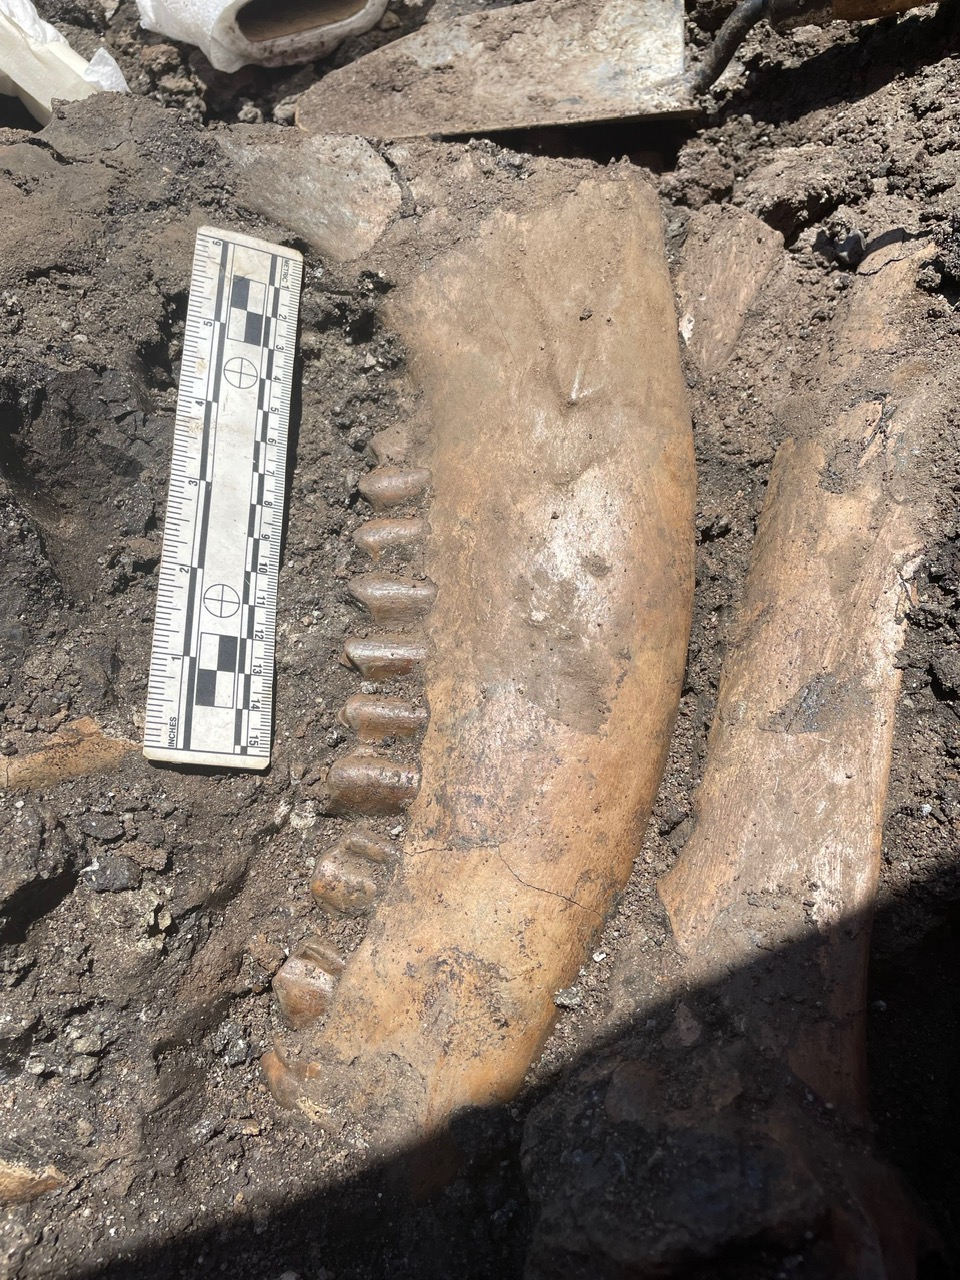 Fossil of jaw in the dirt